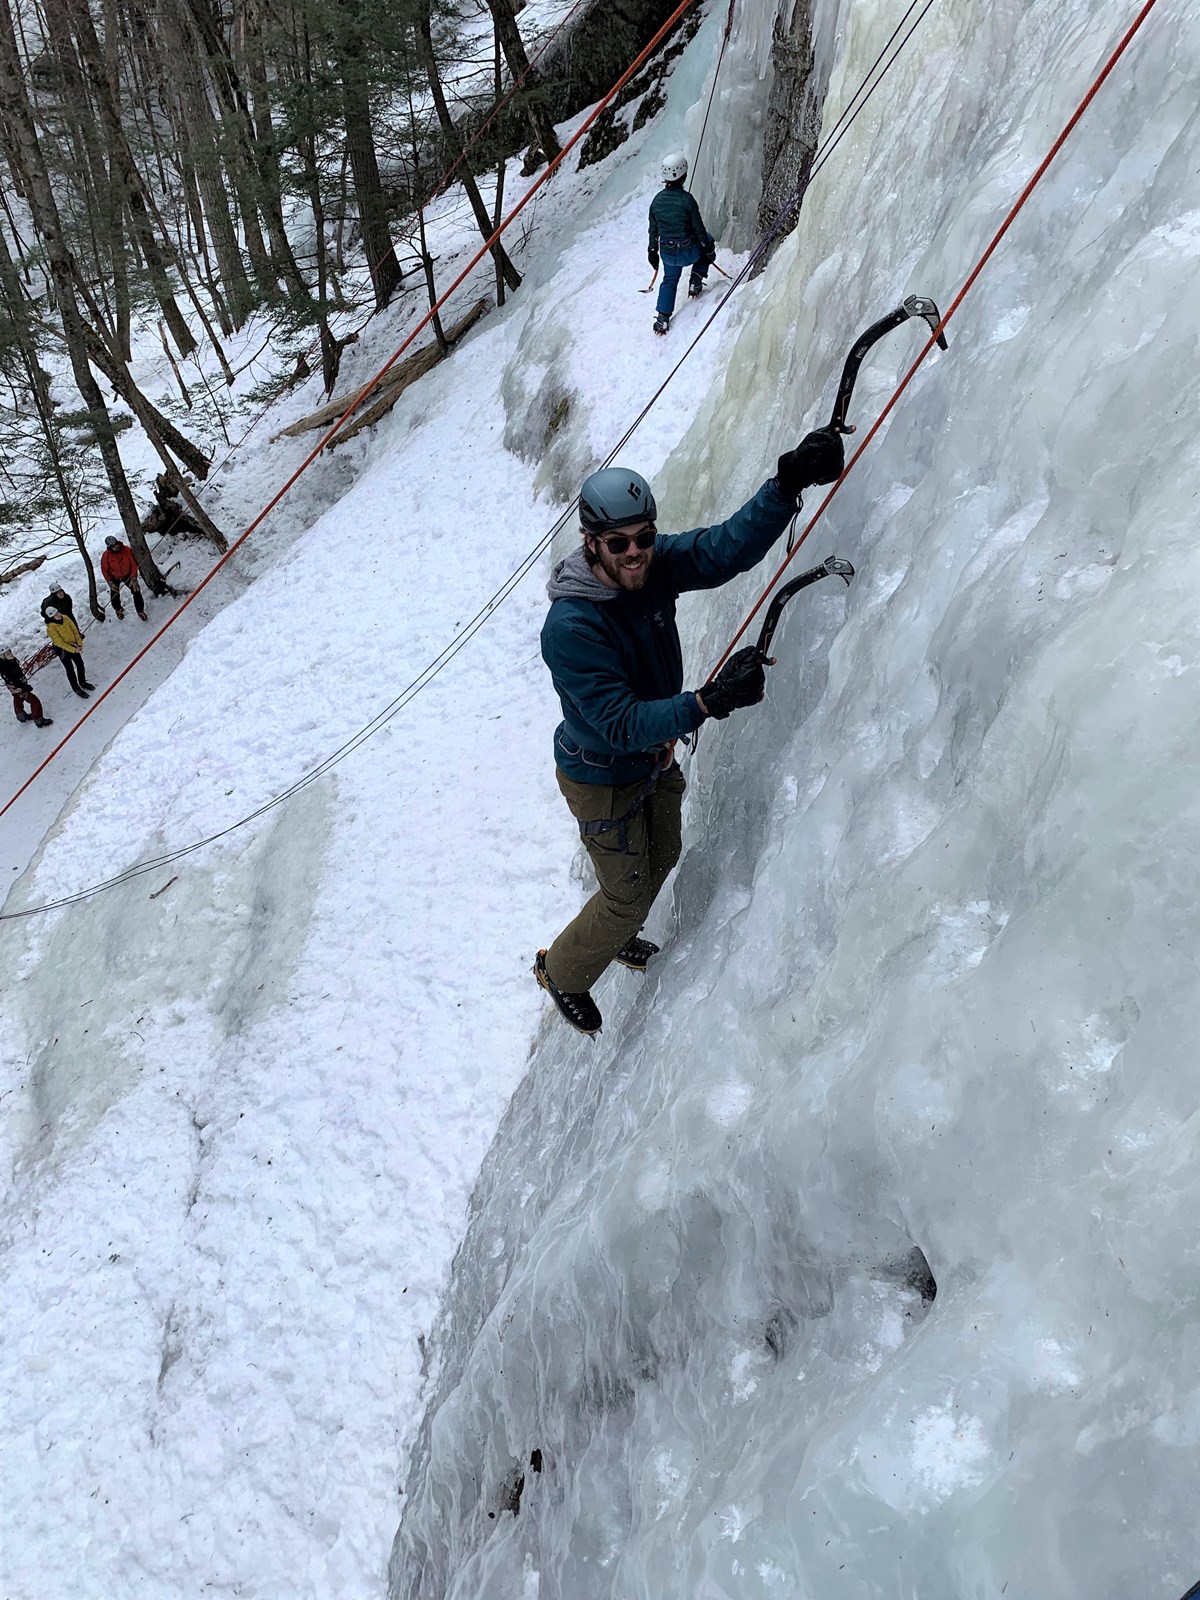 A person smiles while looking up and climbing ice with two ice tools in the ice.